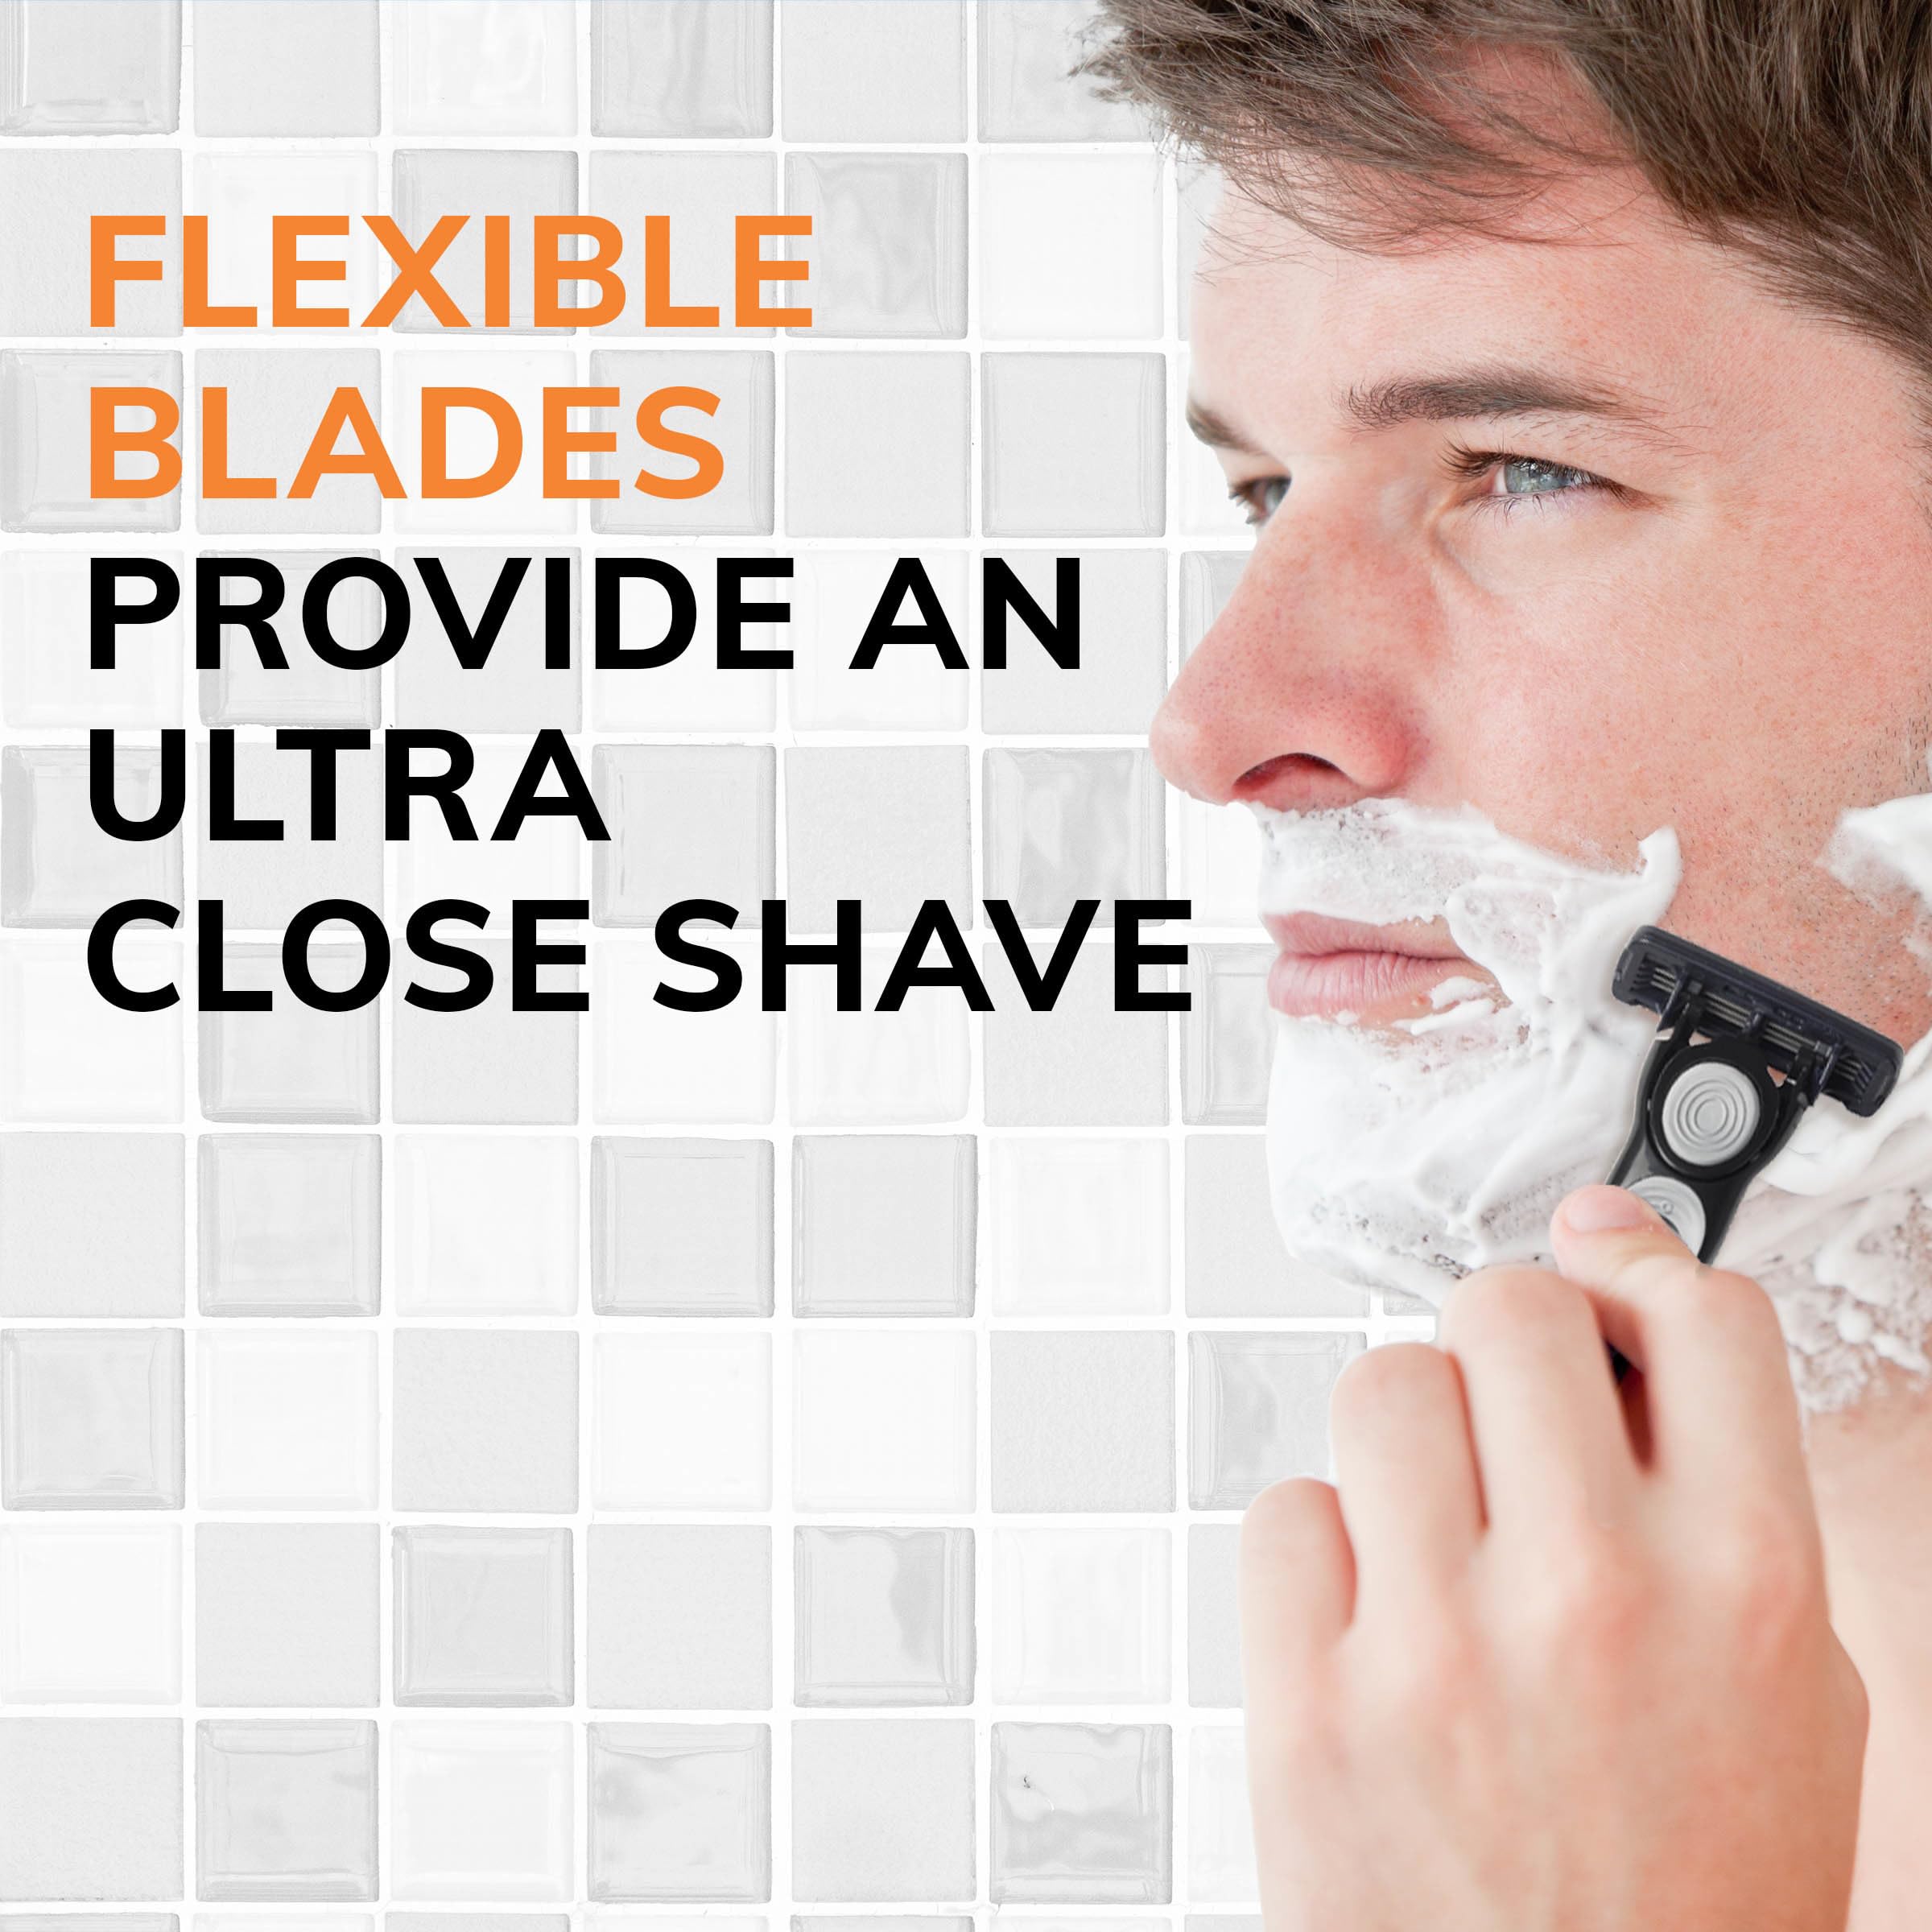 BIC Flex 4 Hybrid Men's 4-Blade Disposable Razor, 2 Handles and 20 Cartridges, Smooth and Close Shave